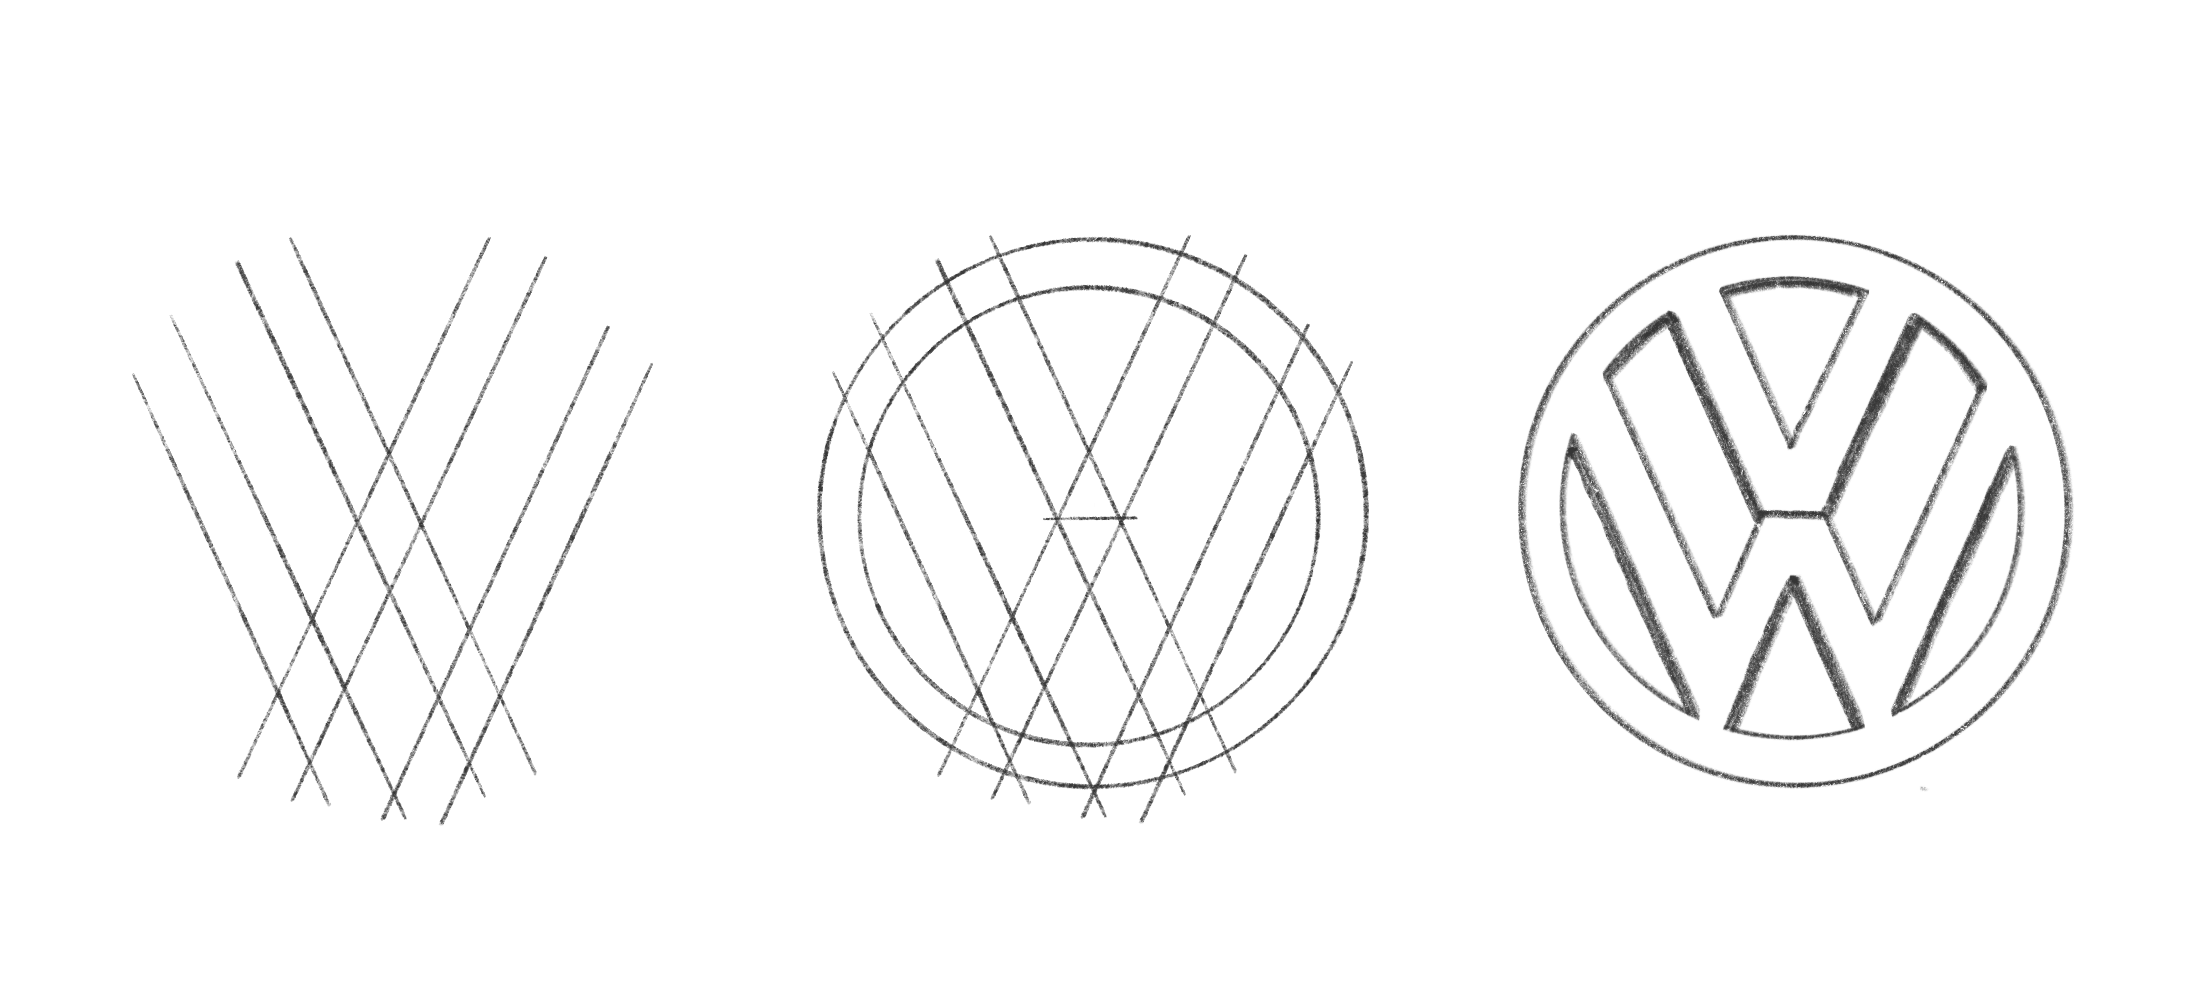 A step-by-step easy drawing guide for drawing the Mercedes logo